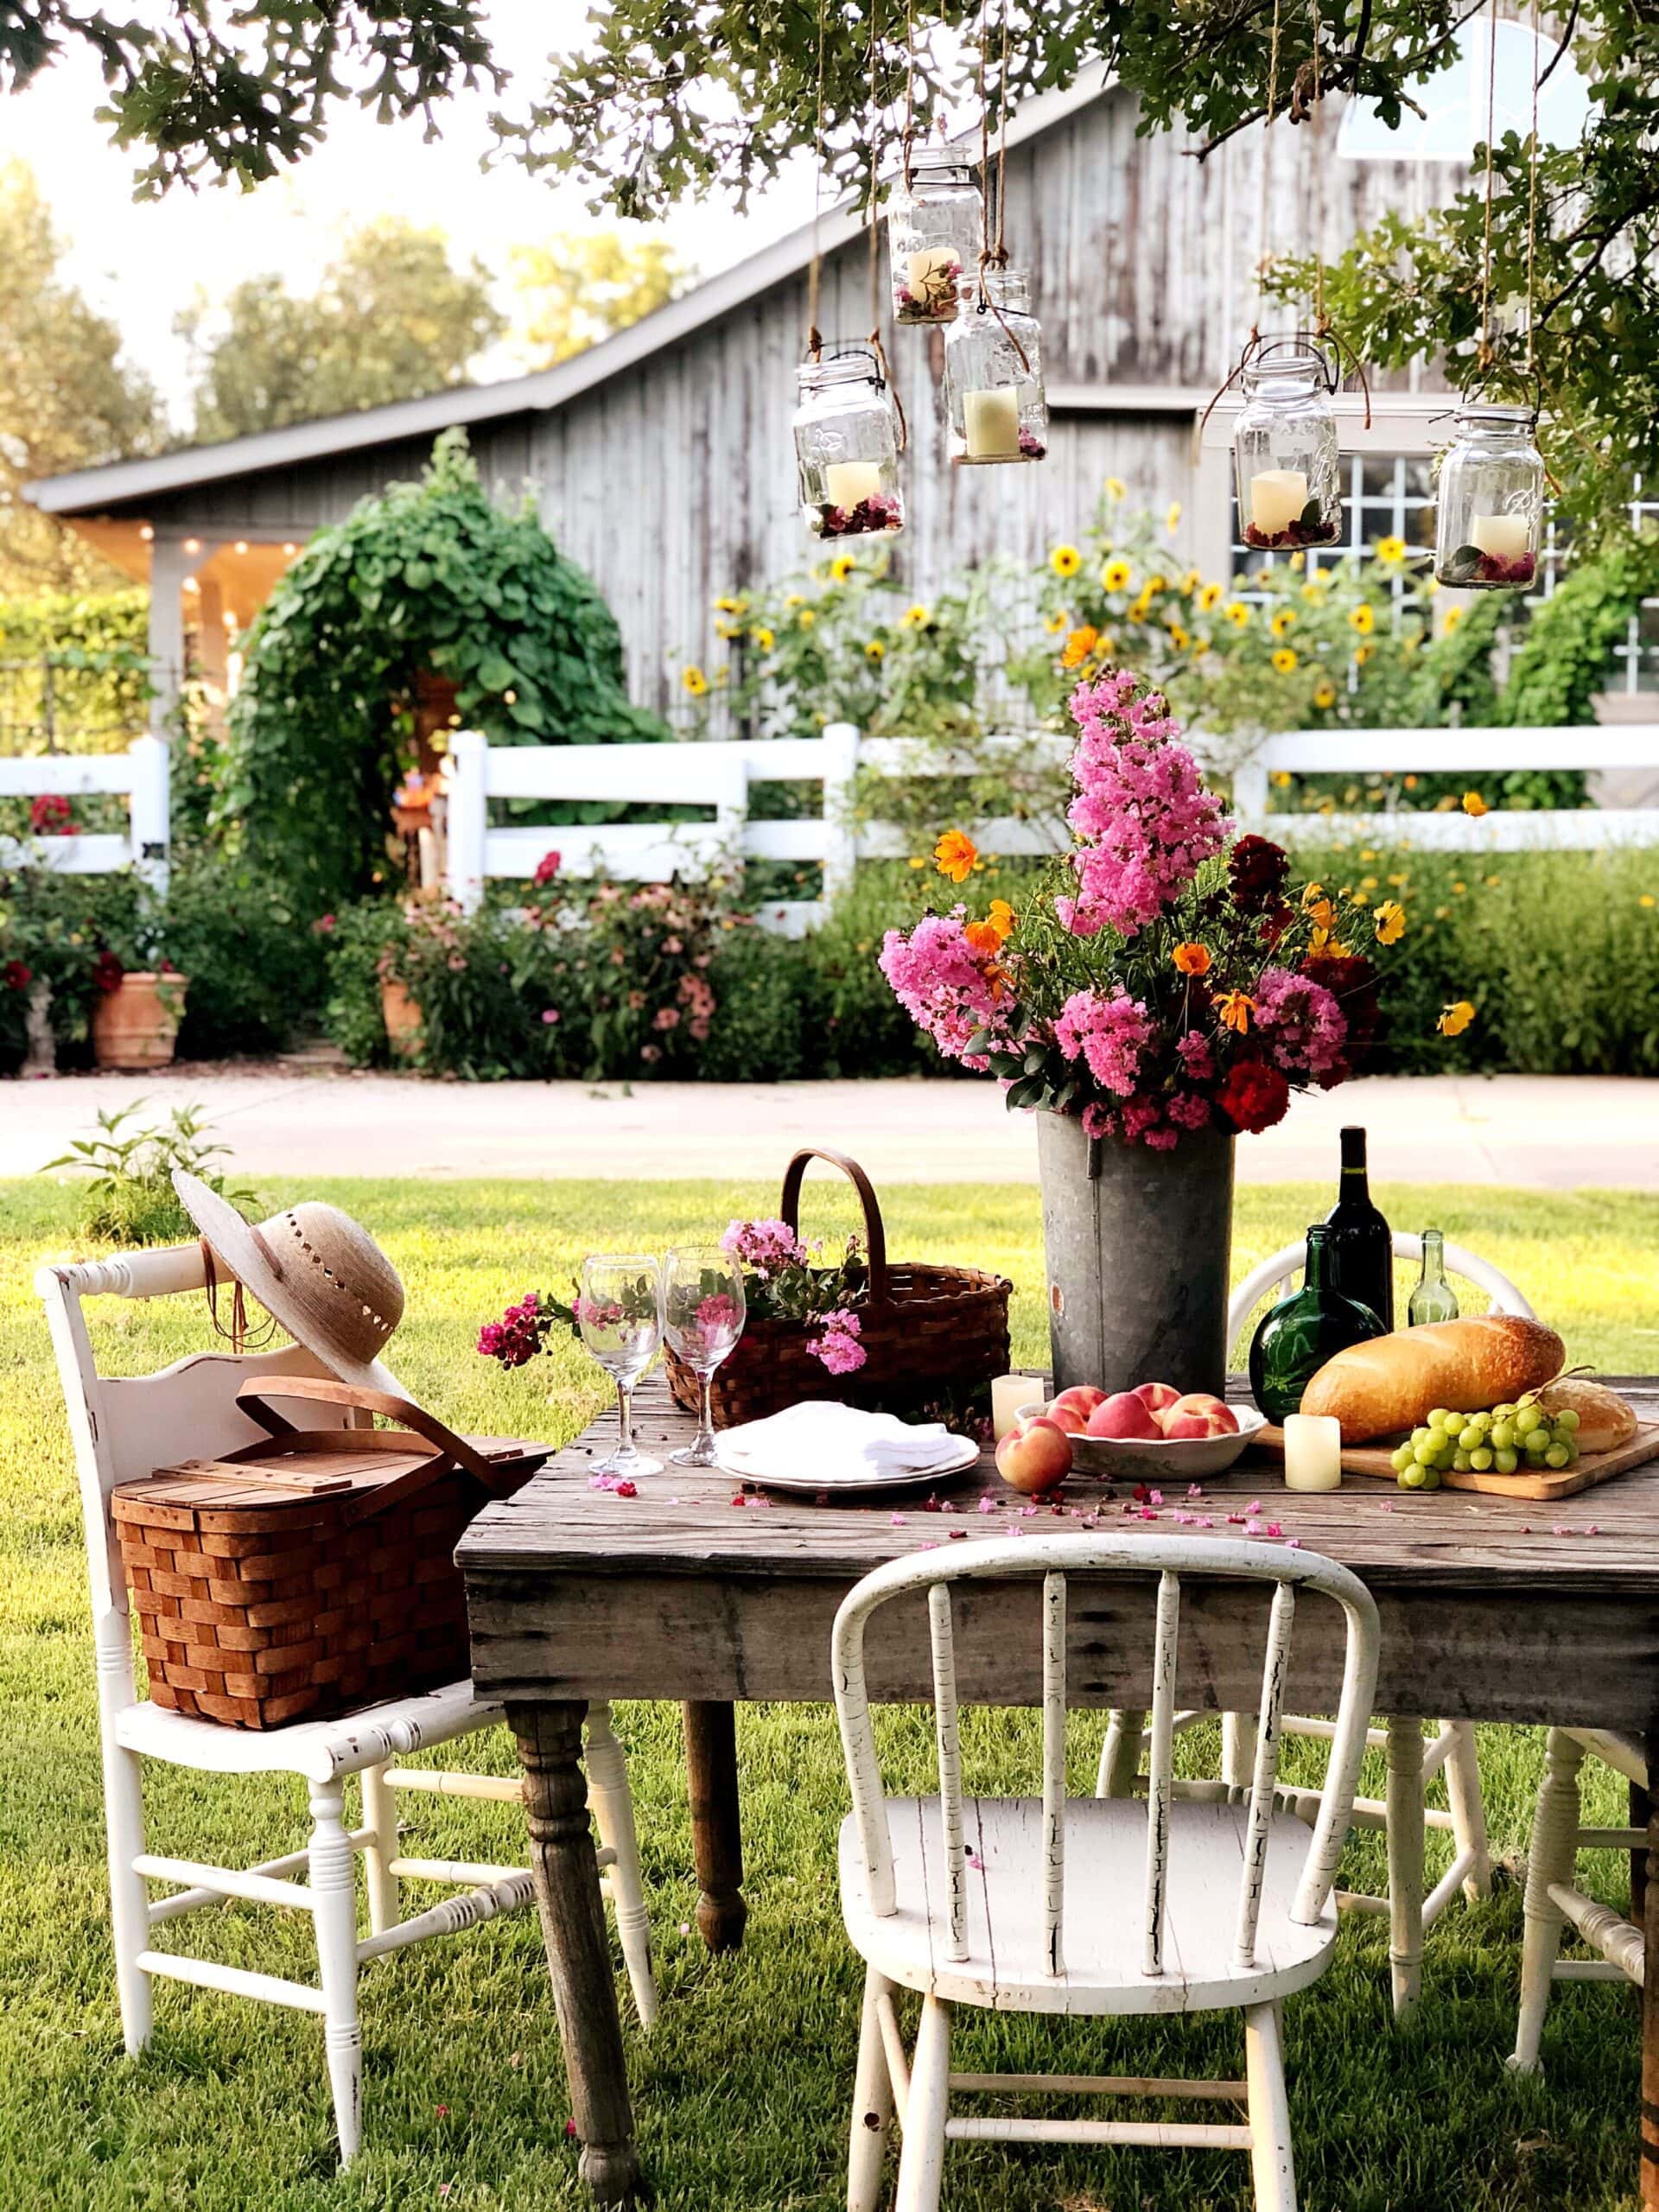 Picturesque Country Living Home Tour & More! The Style Showcase 223